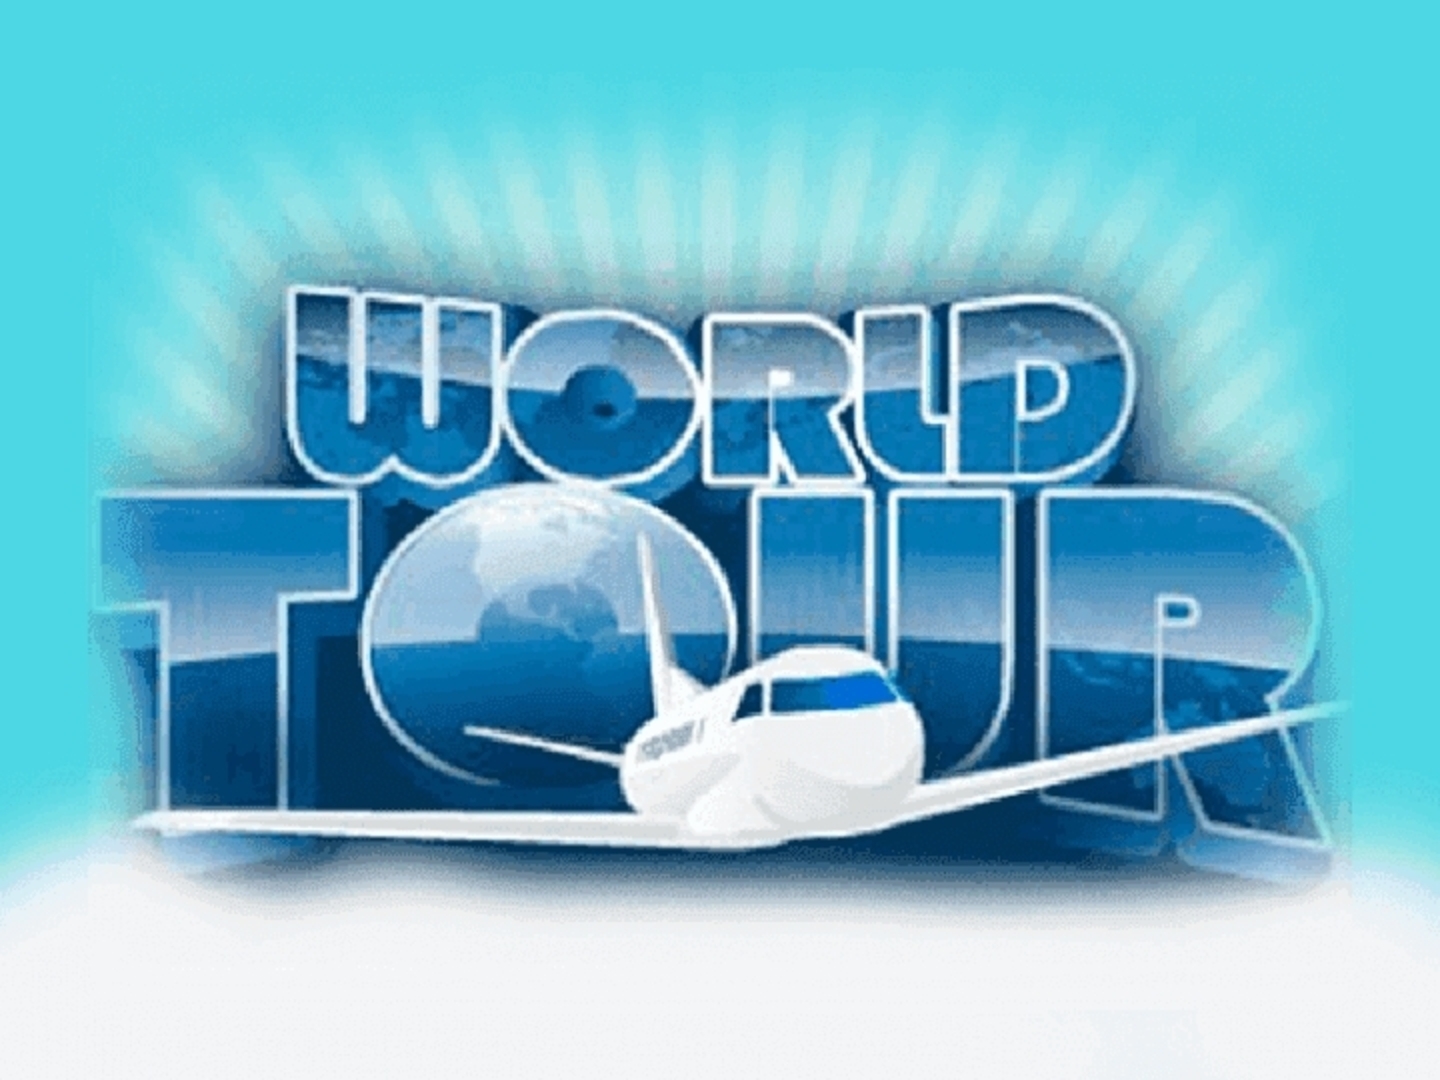 The World Tour Online Slot Demo Game by iSoftBet